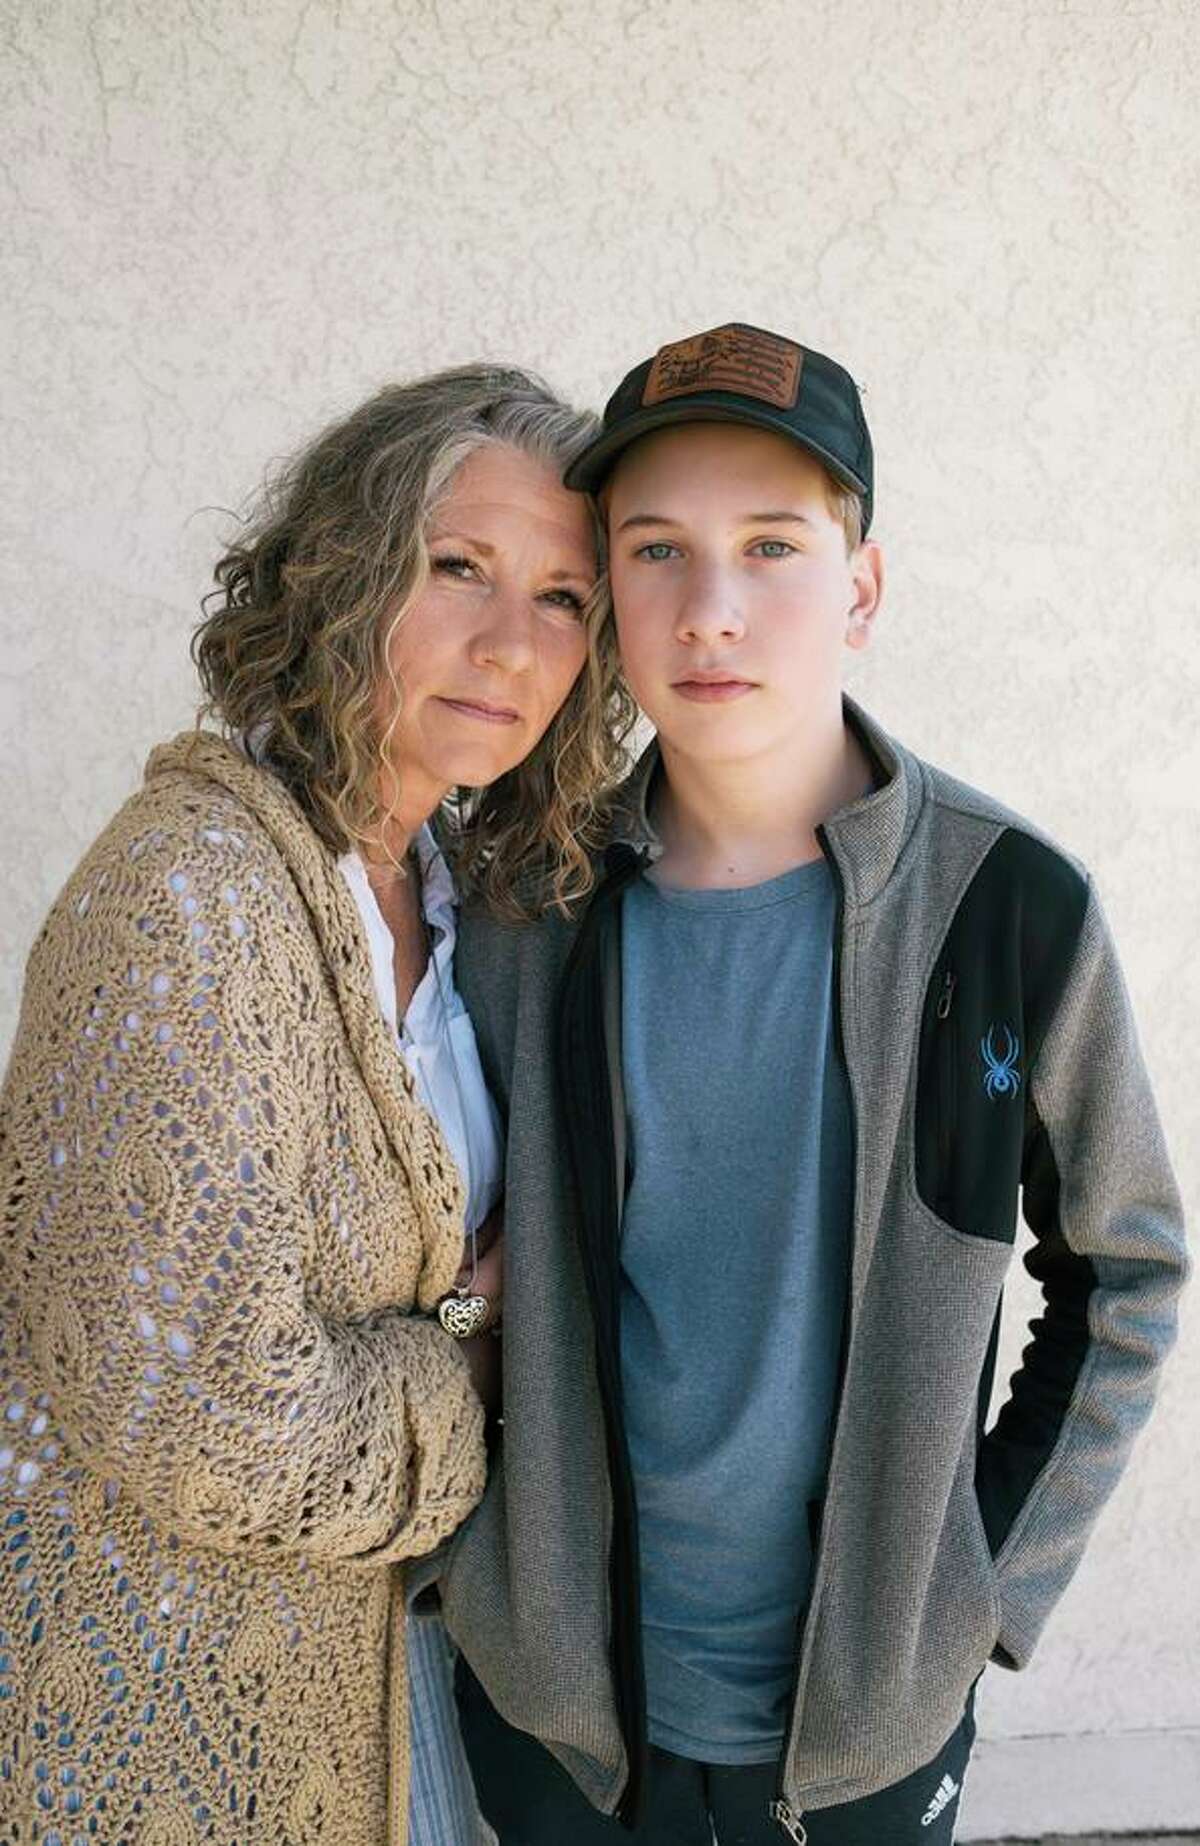 Kathy Stainbrook (left) with her son Caleb. Stainbrook, who helped with the recall, says the pandemic restrictions in schools were what disturbed her most.